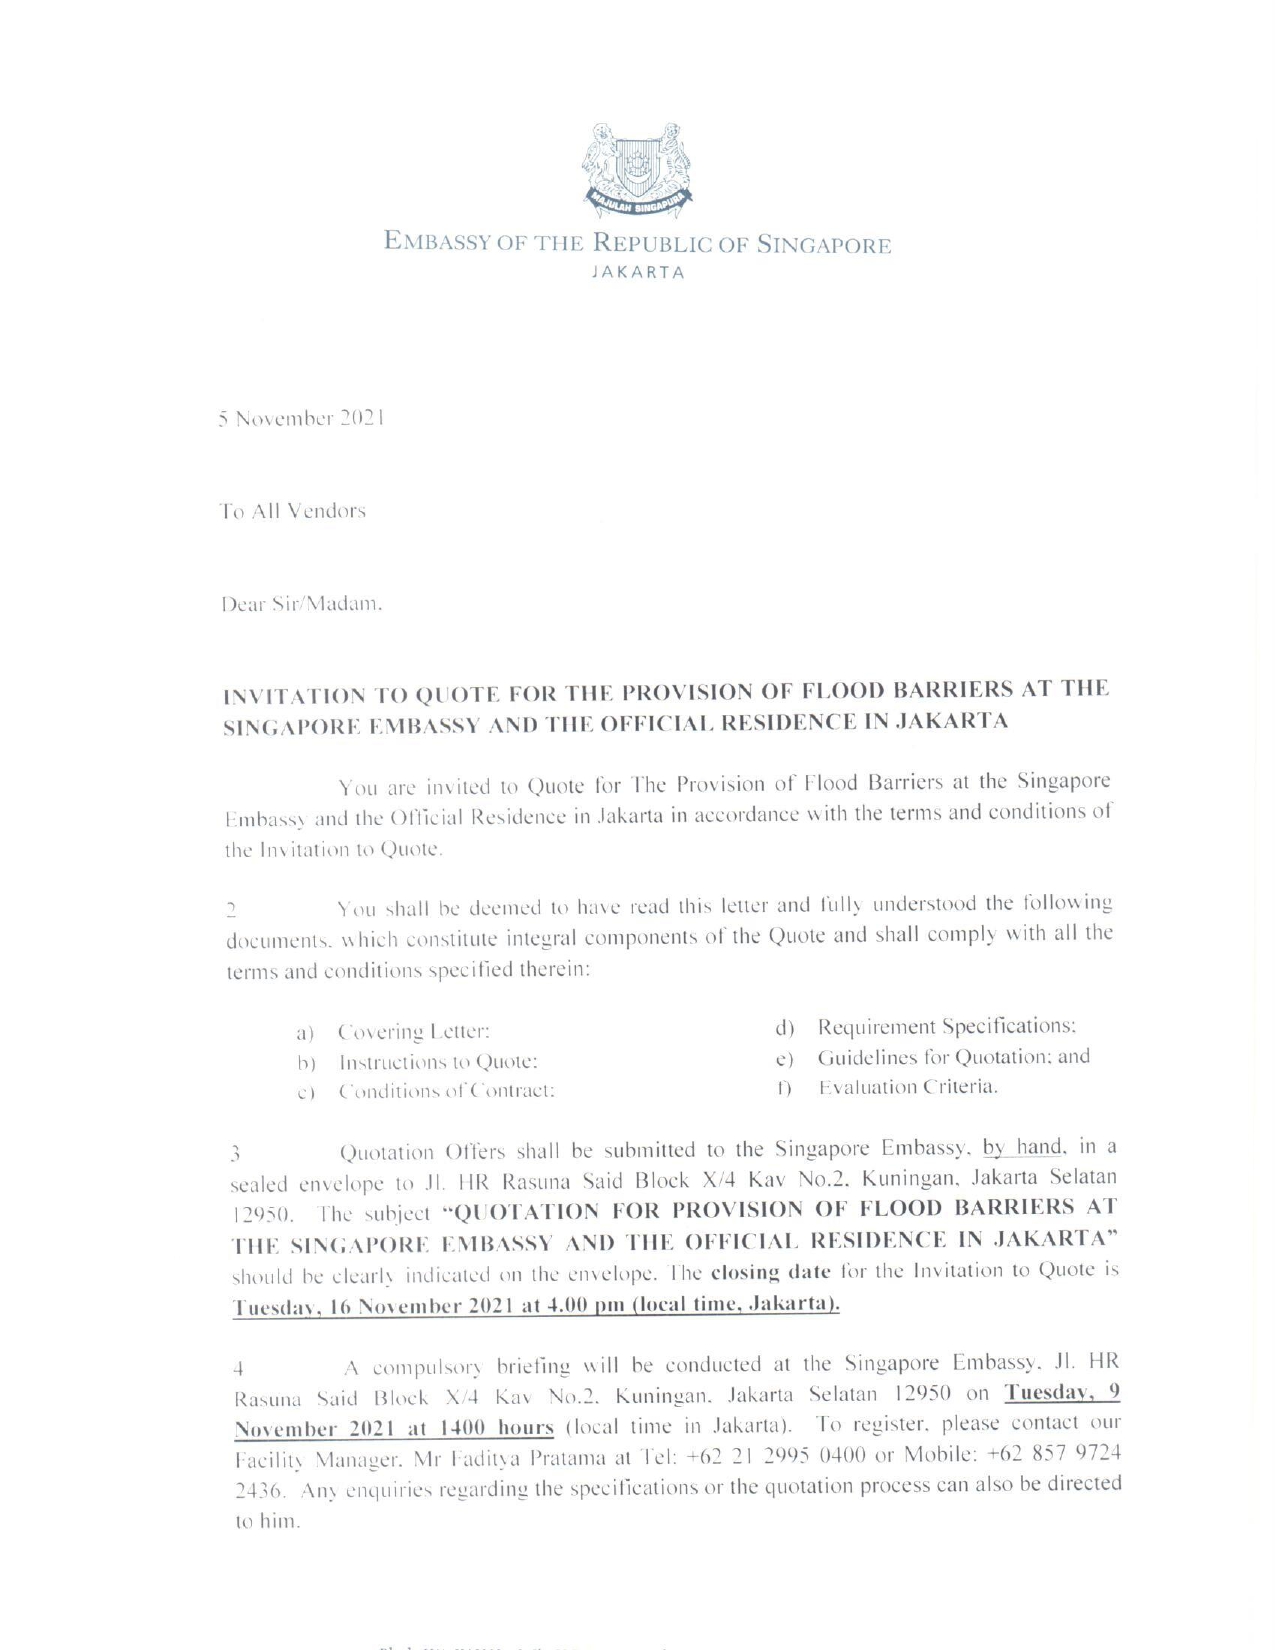 LOI  Provision of Flood Barriers at the Singapore Embassy and the Officpage0001